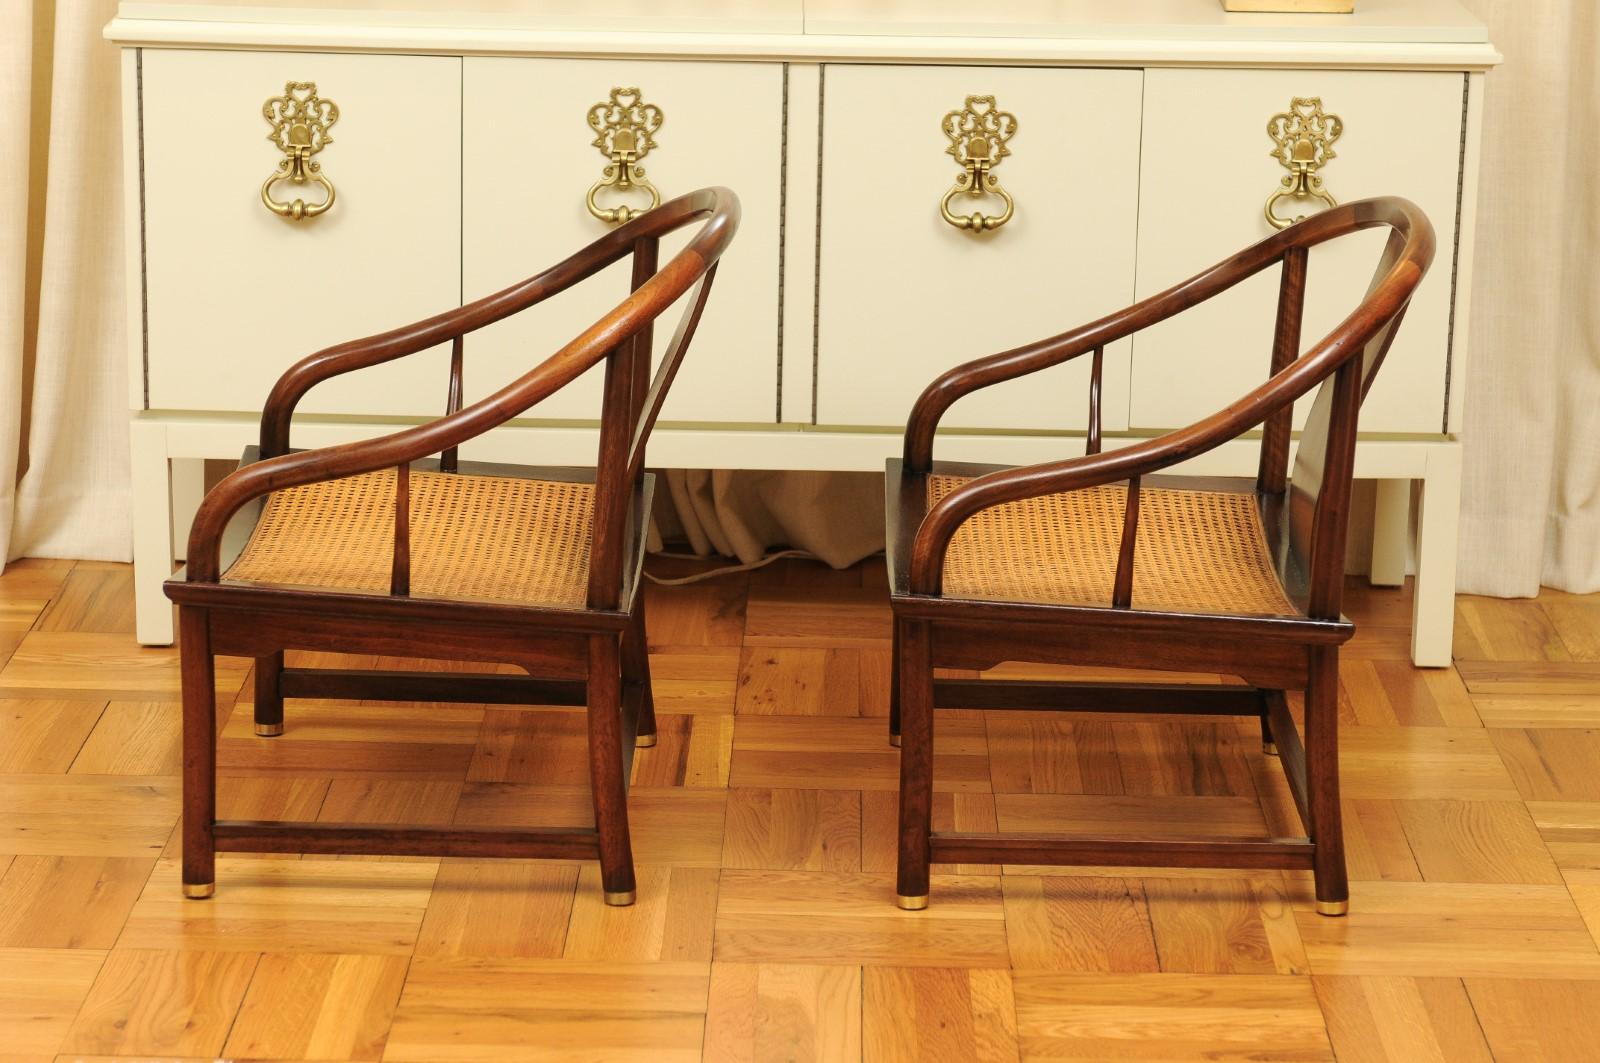 Stunning Restored Pair of Walnut Cane Loungers by Michael Taylor, circa 1960 For Sale 9